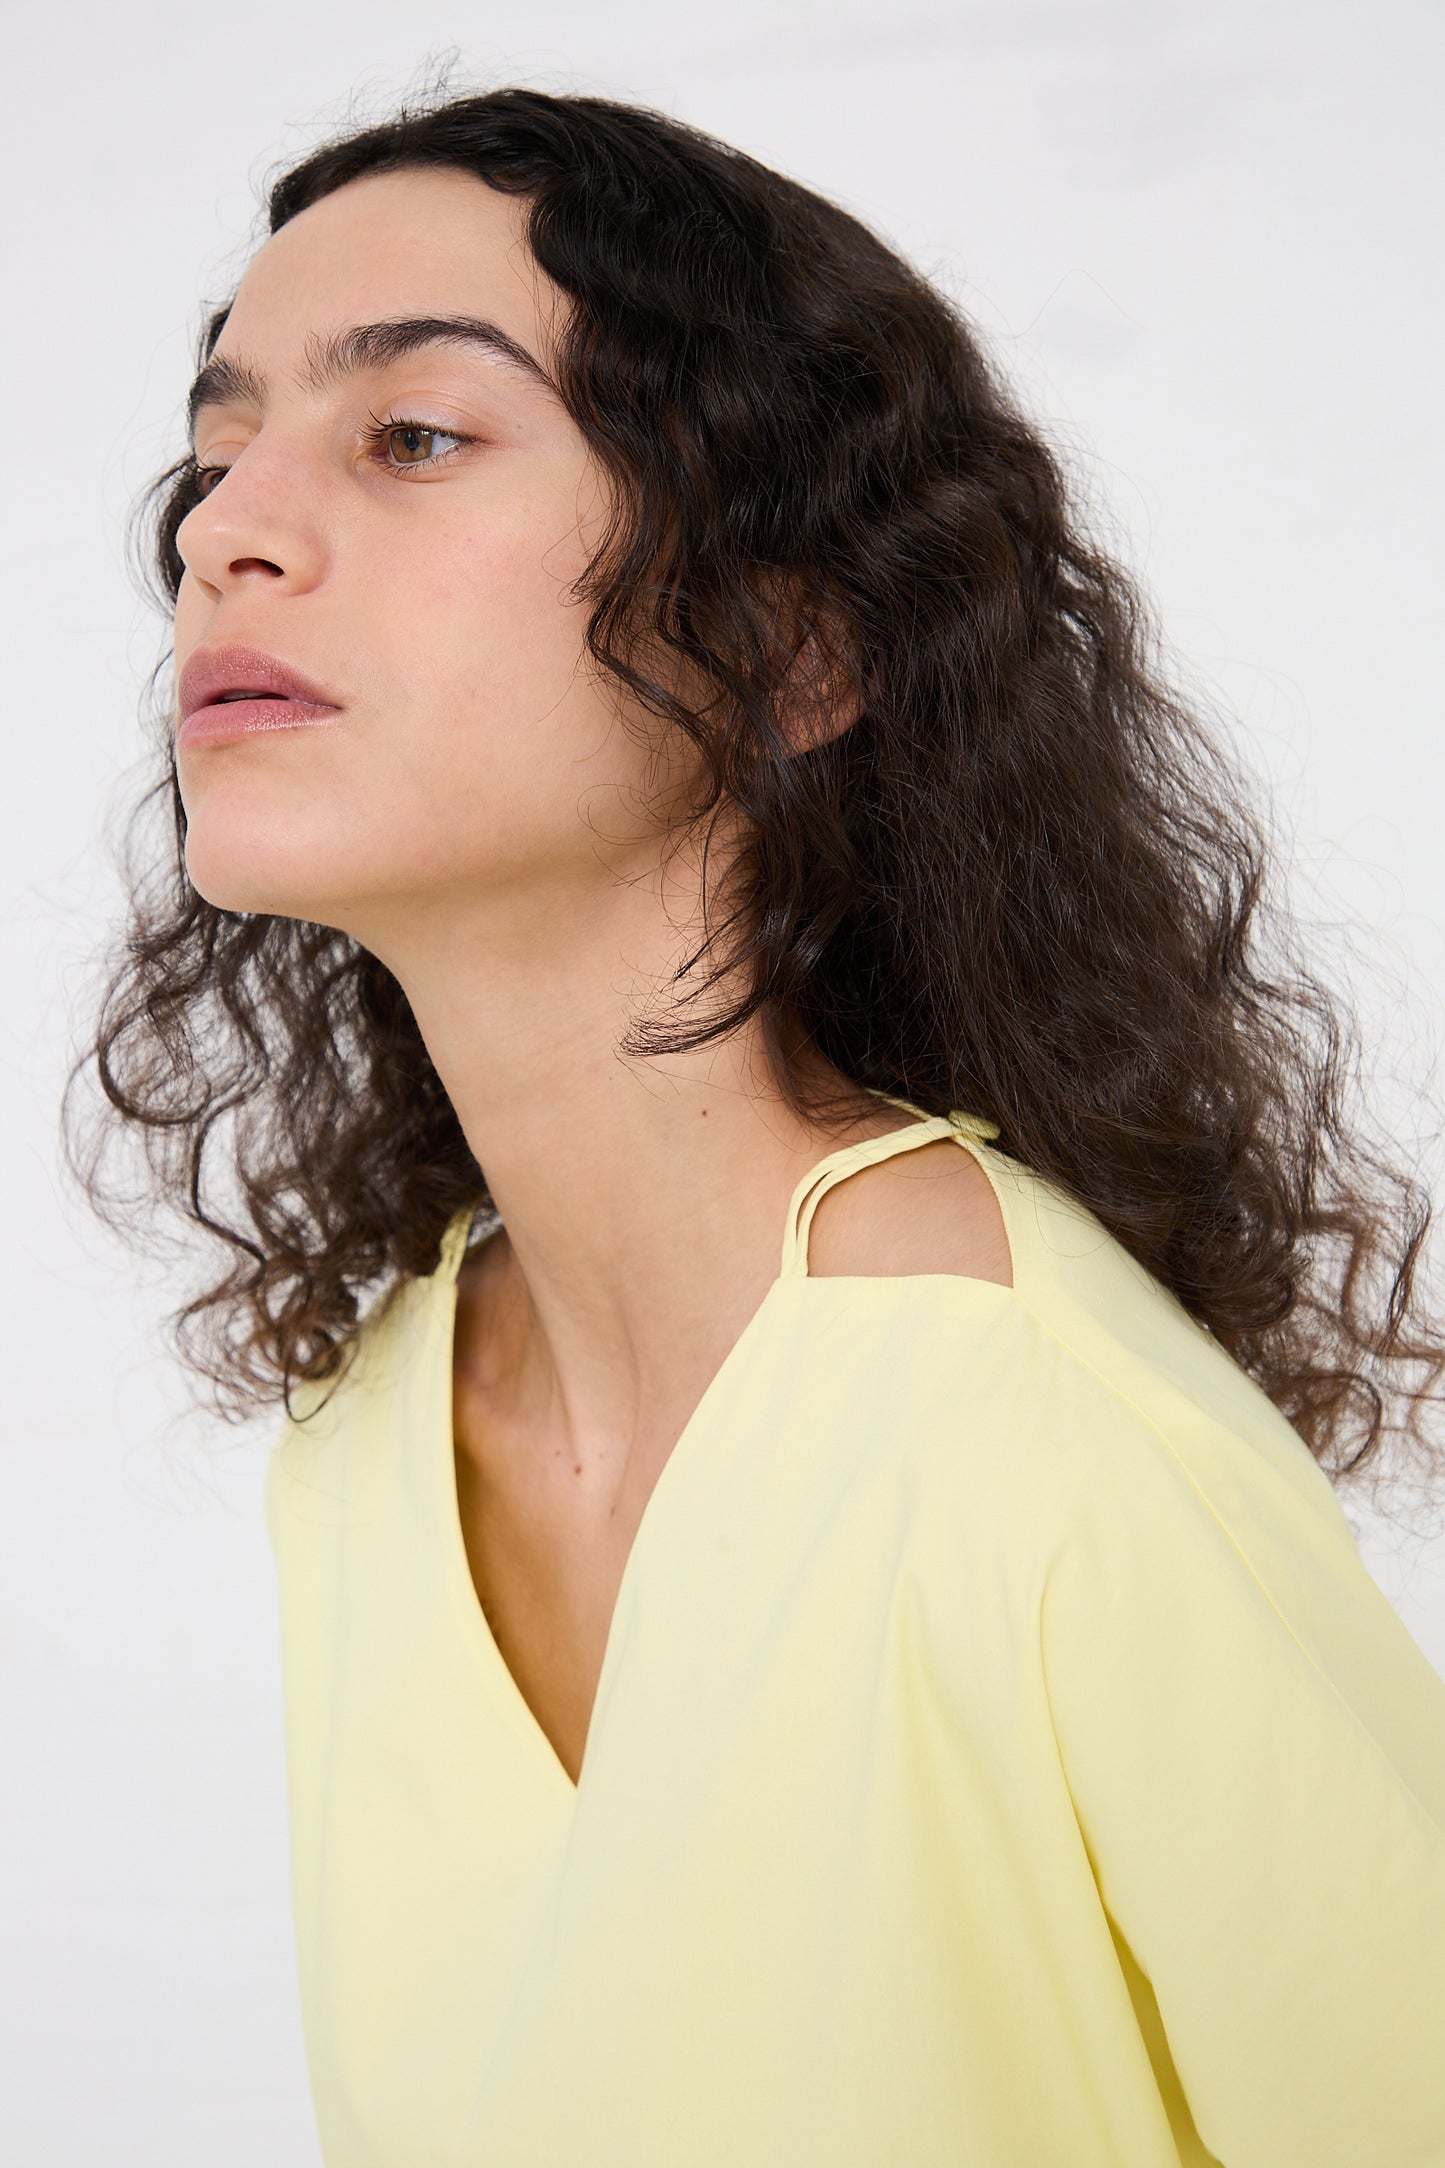 Profile view of a person with shoulder-length curly hair, wearing a Black Crane Organic Cotton Star Neck Dress in Lemon.